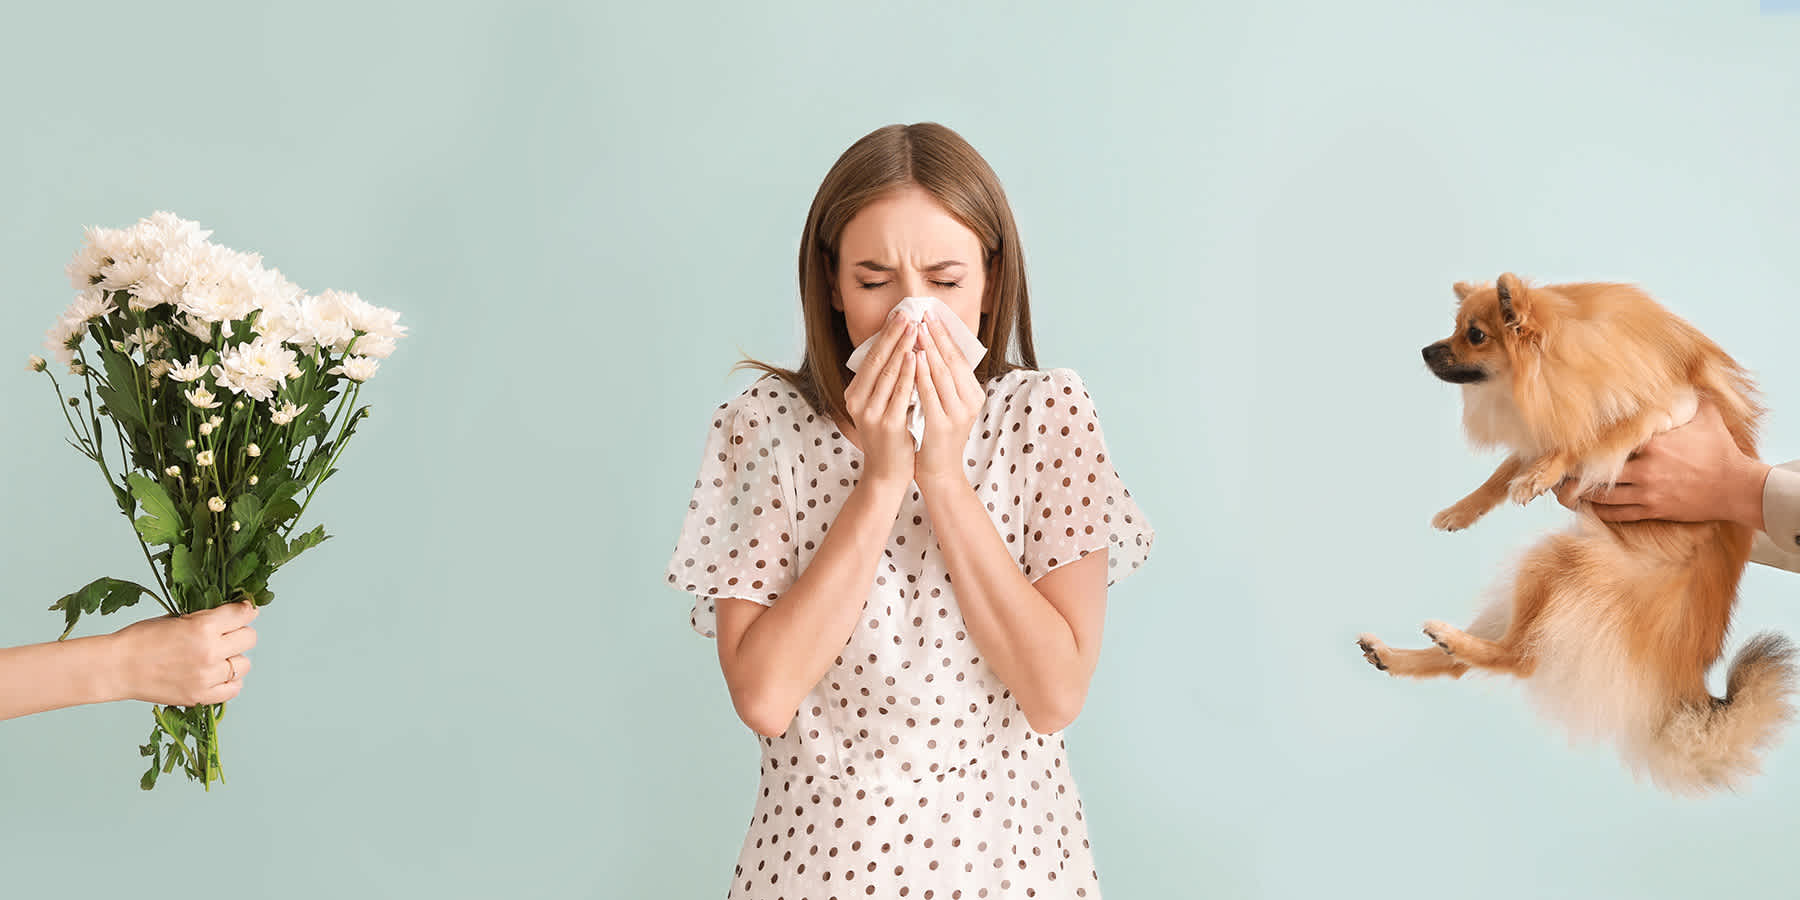 Woman sneezing into tissue because of allergy symptoms